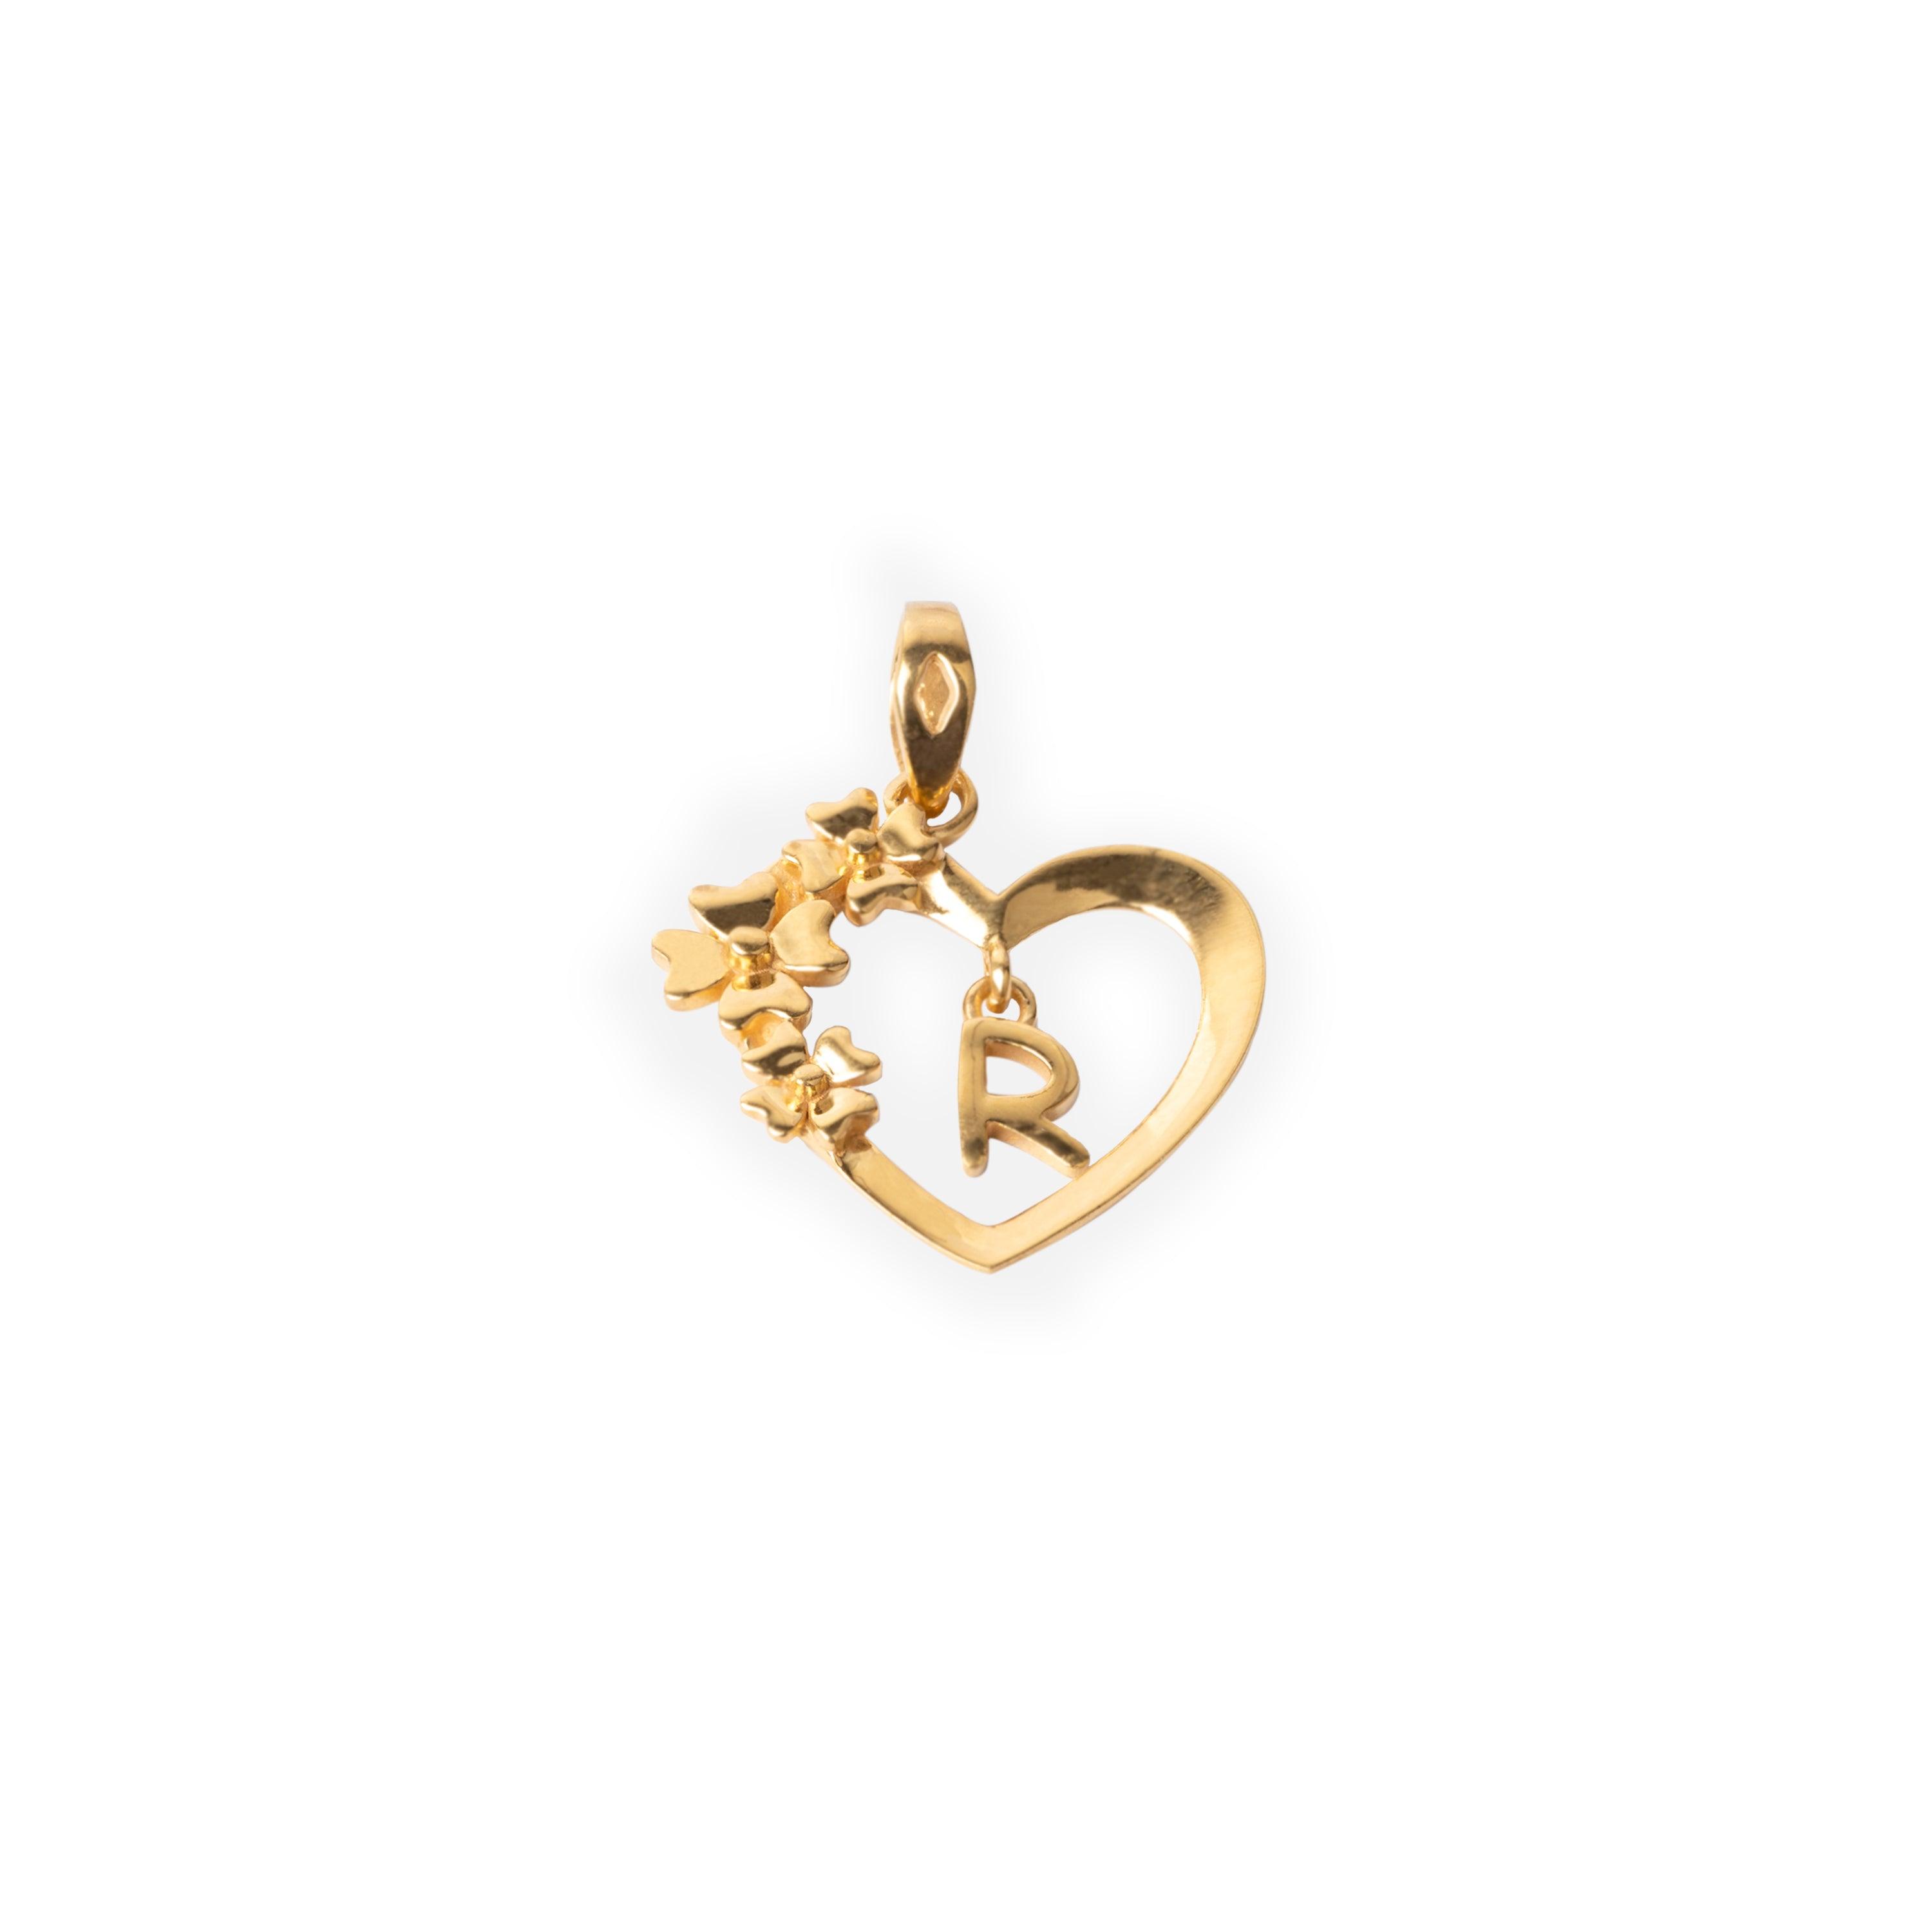 'R' 22ct Gold Heart Shape Initial Pendant with Flower Design P-7035-R - Minar Jewellers